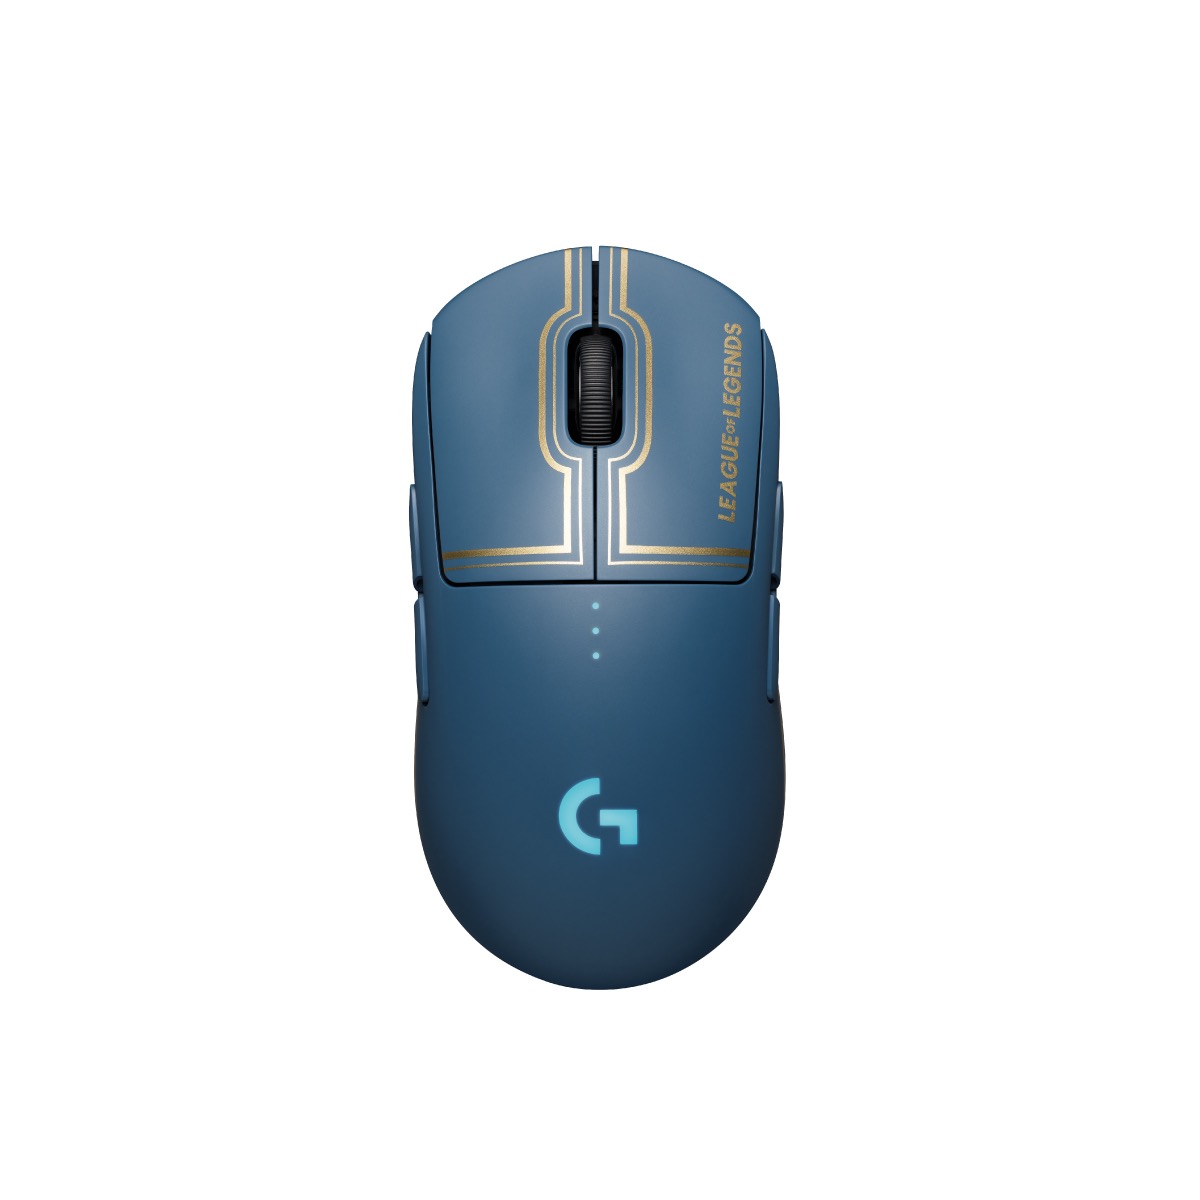 Logitech G Pro League of Legends Edition Wireless Gaming Mouse